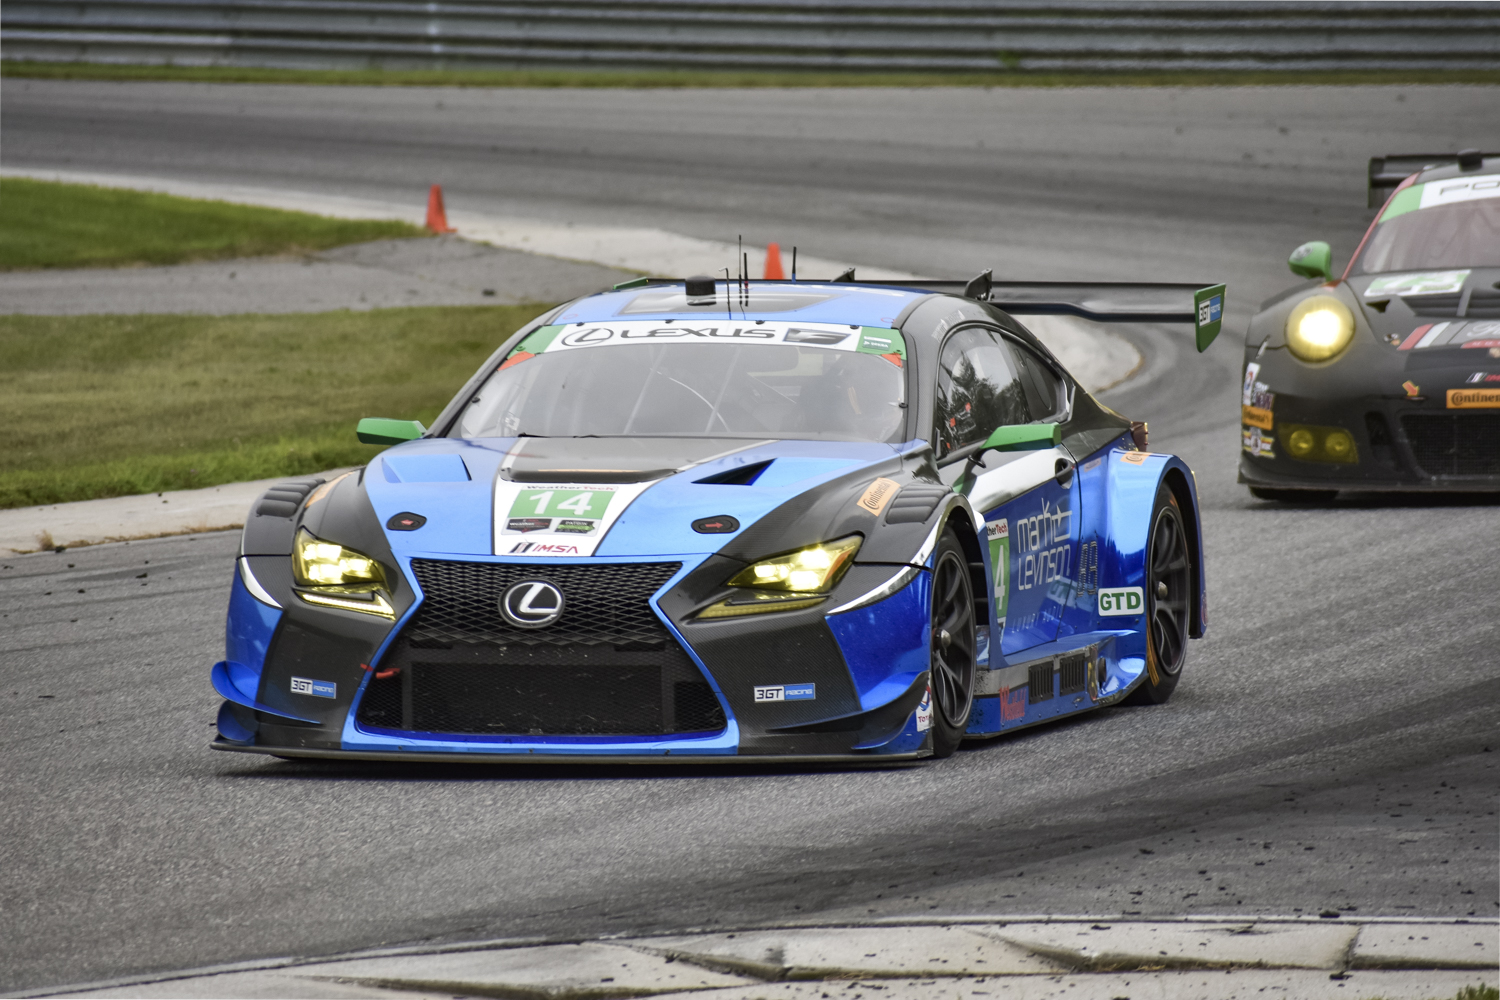 Lexus RC F GT3 rounding a corner being tailed by another car